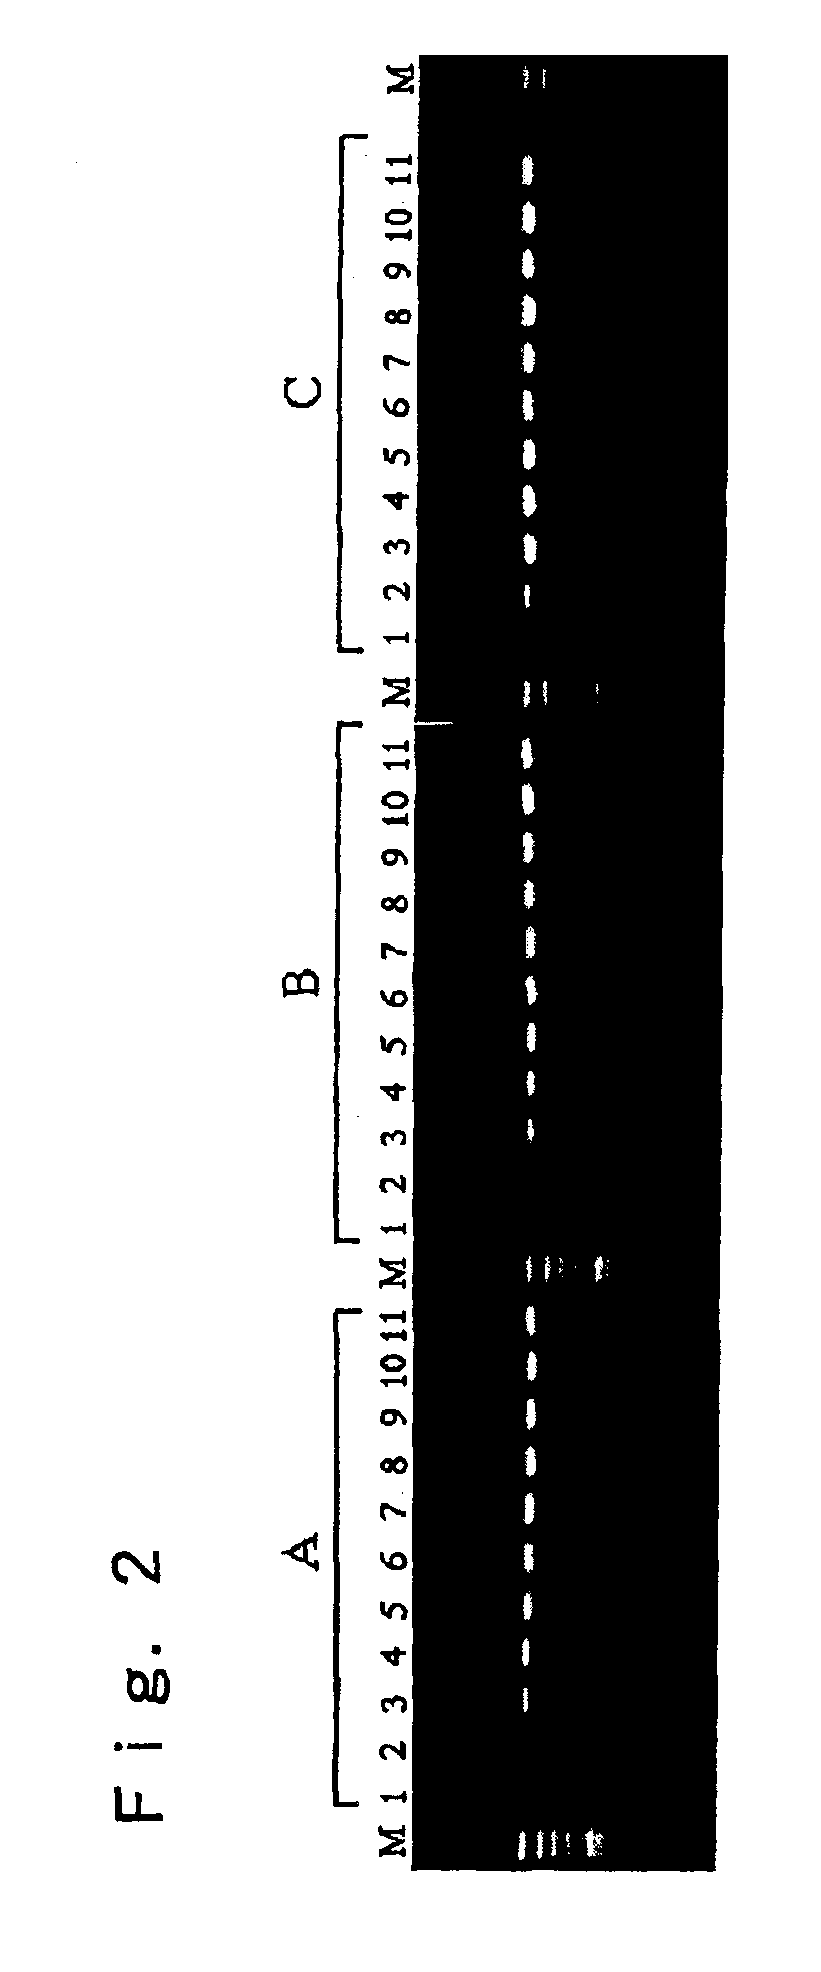 Method for synthesis of nucleic acids